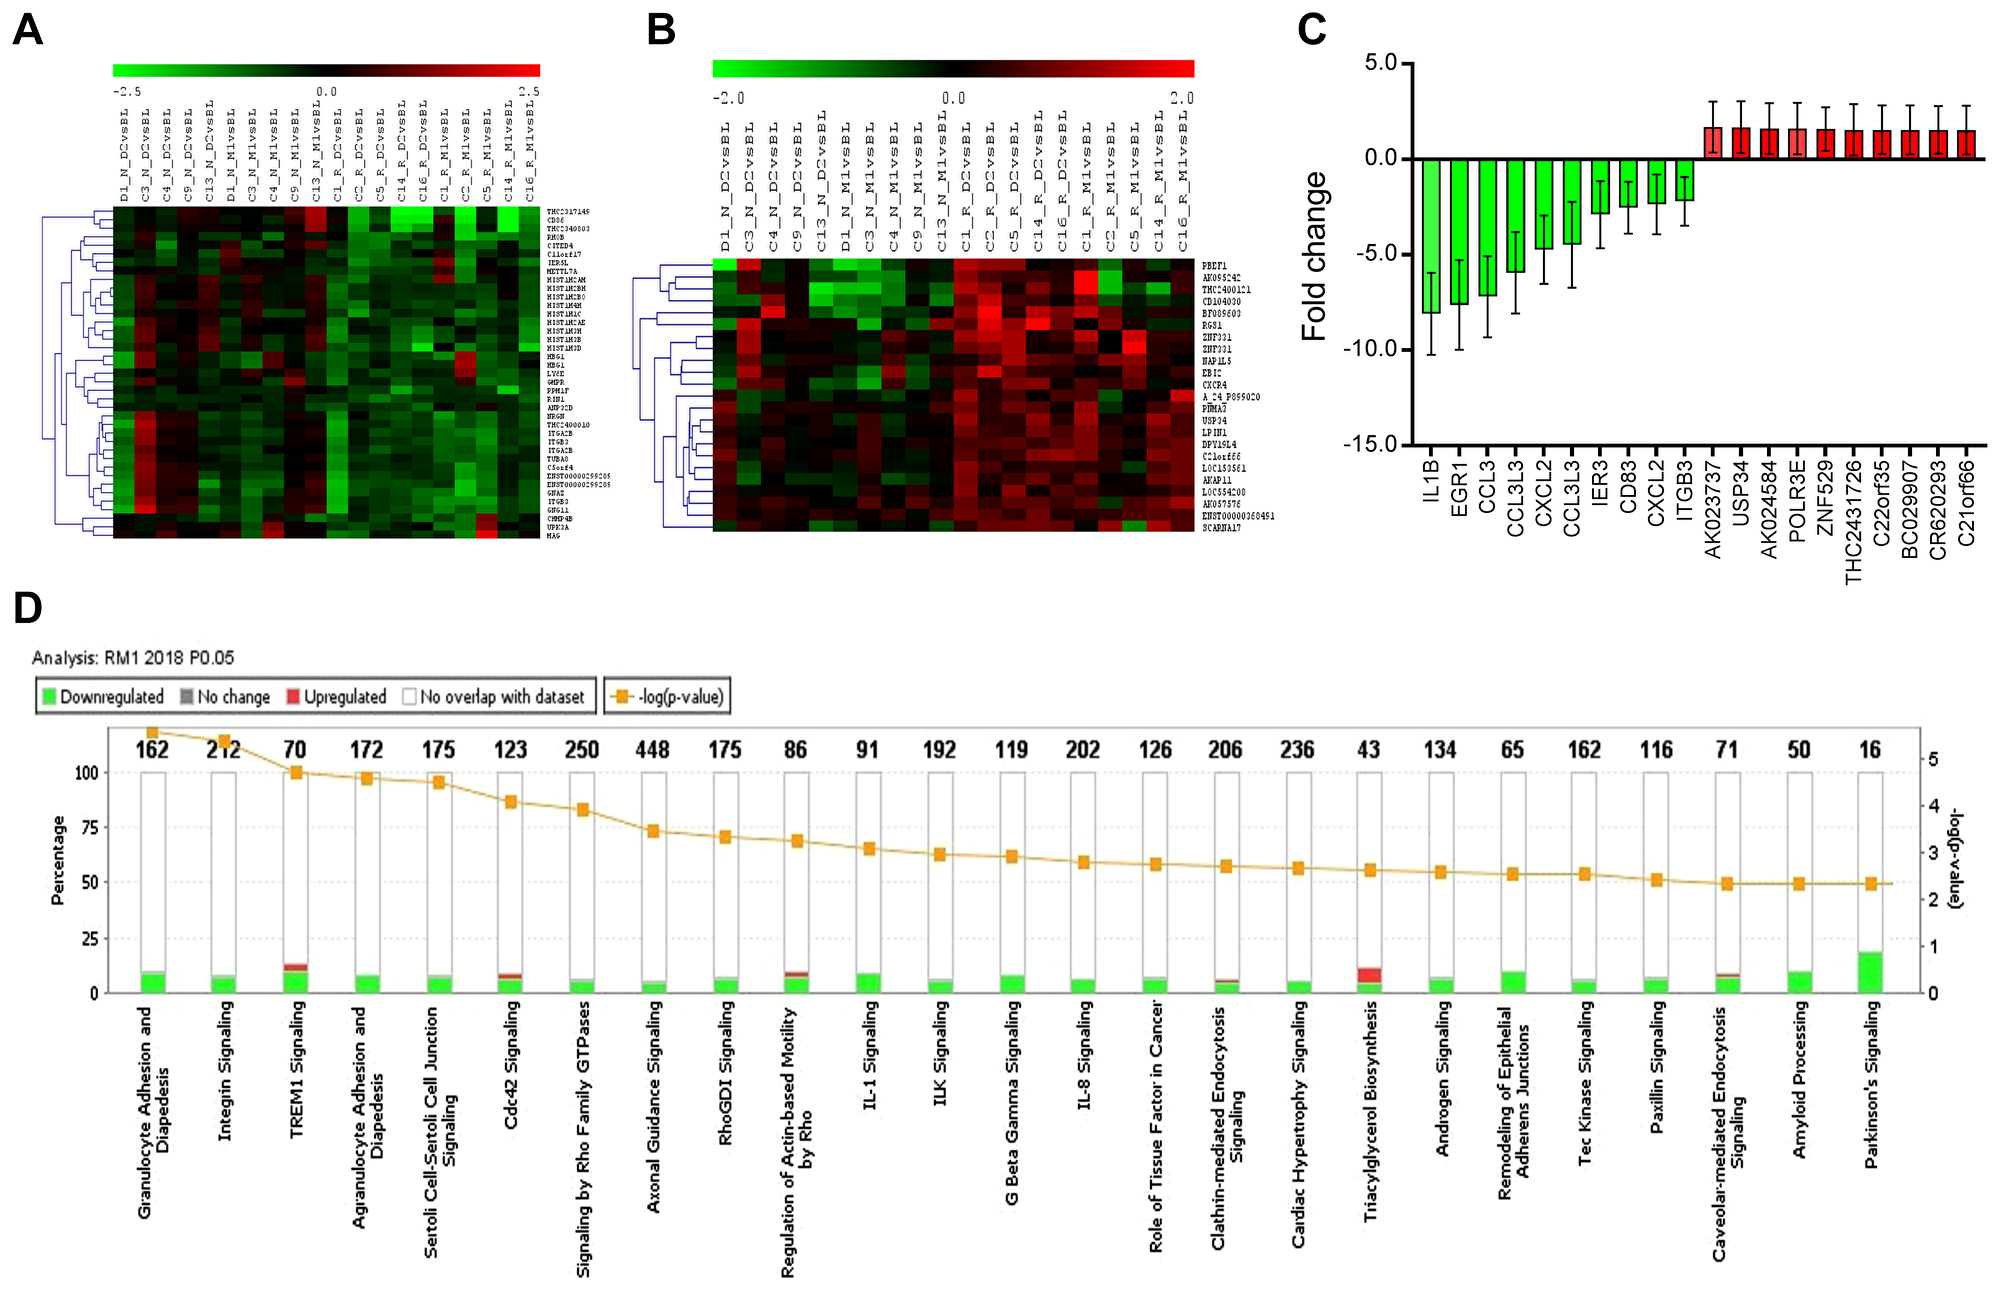 Hierarchically clustered heatmap of differentially expressed genes (DEG), top DEGs, and canonical biological pathways enriched in DEG in RM1.